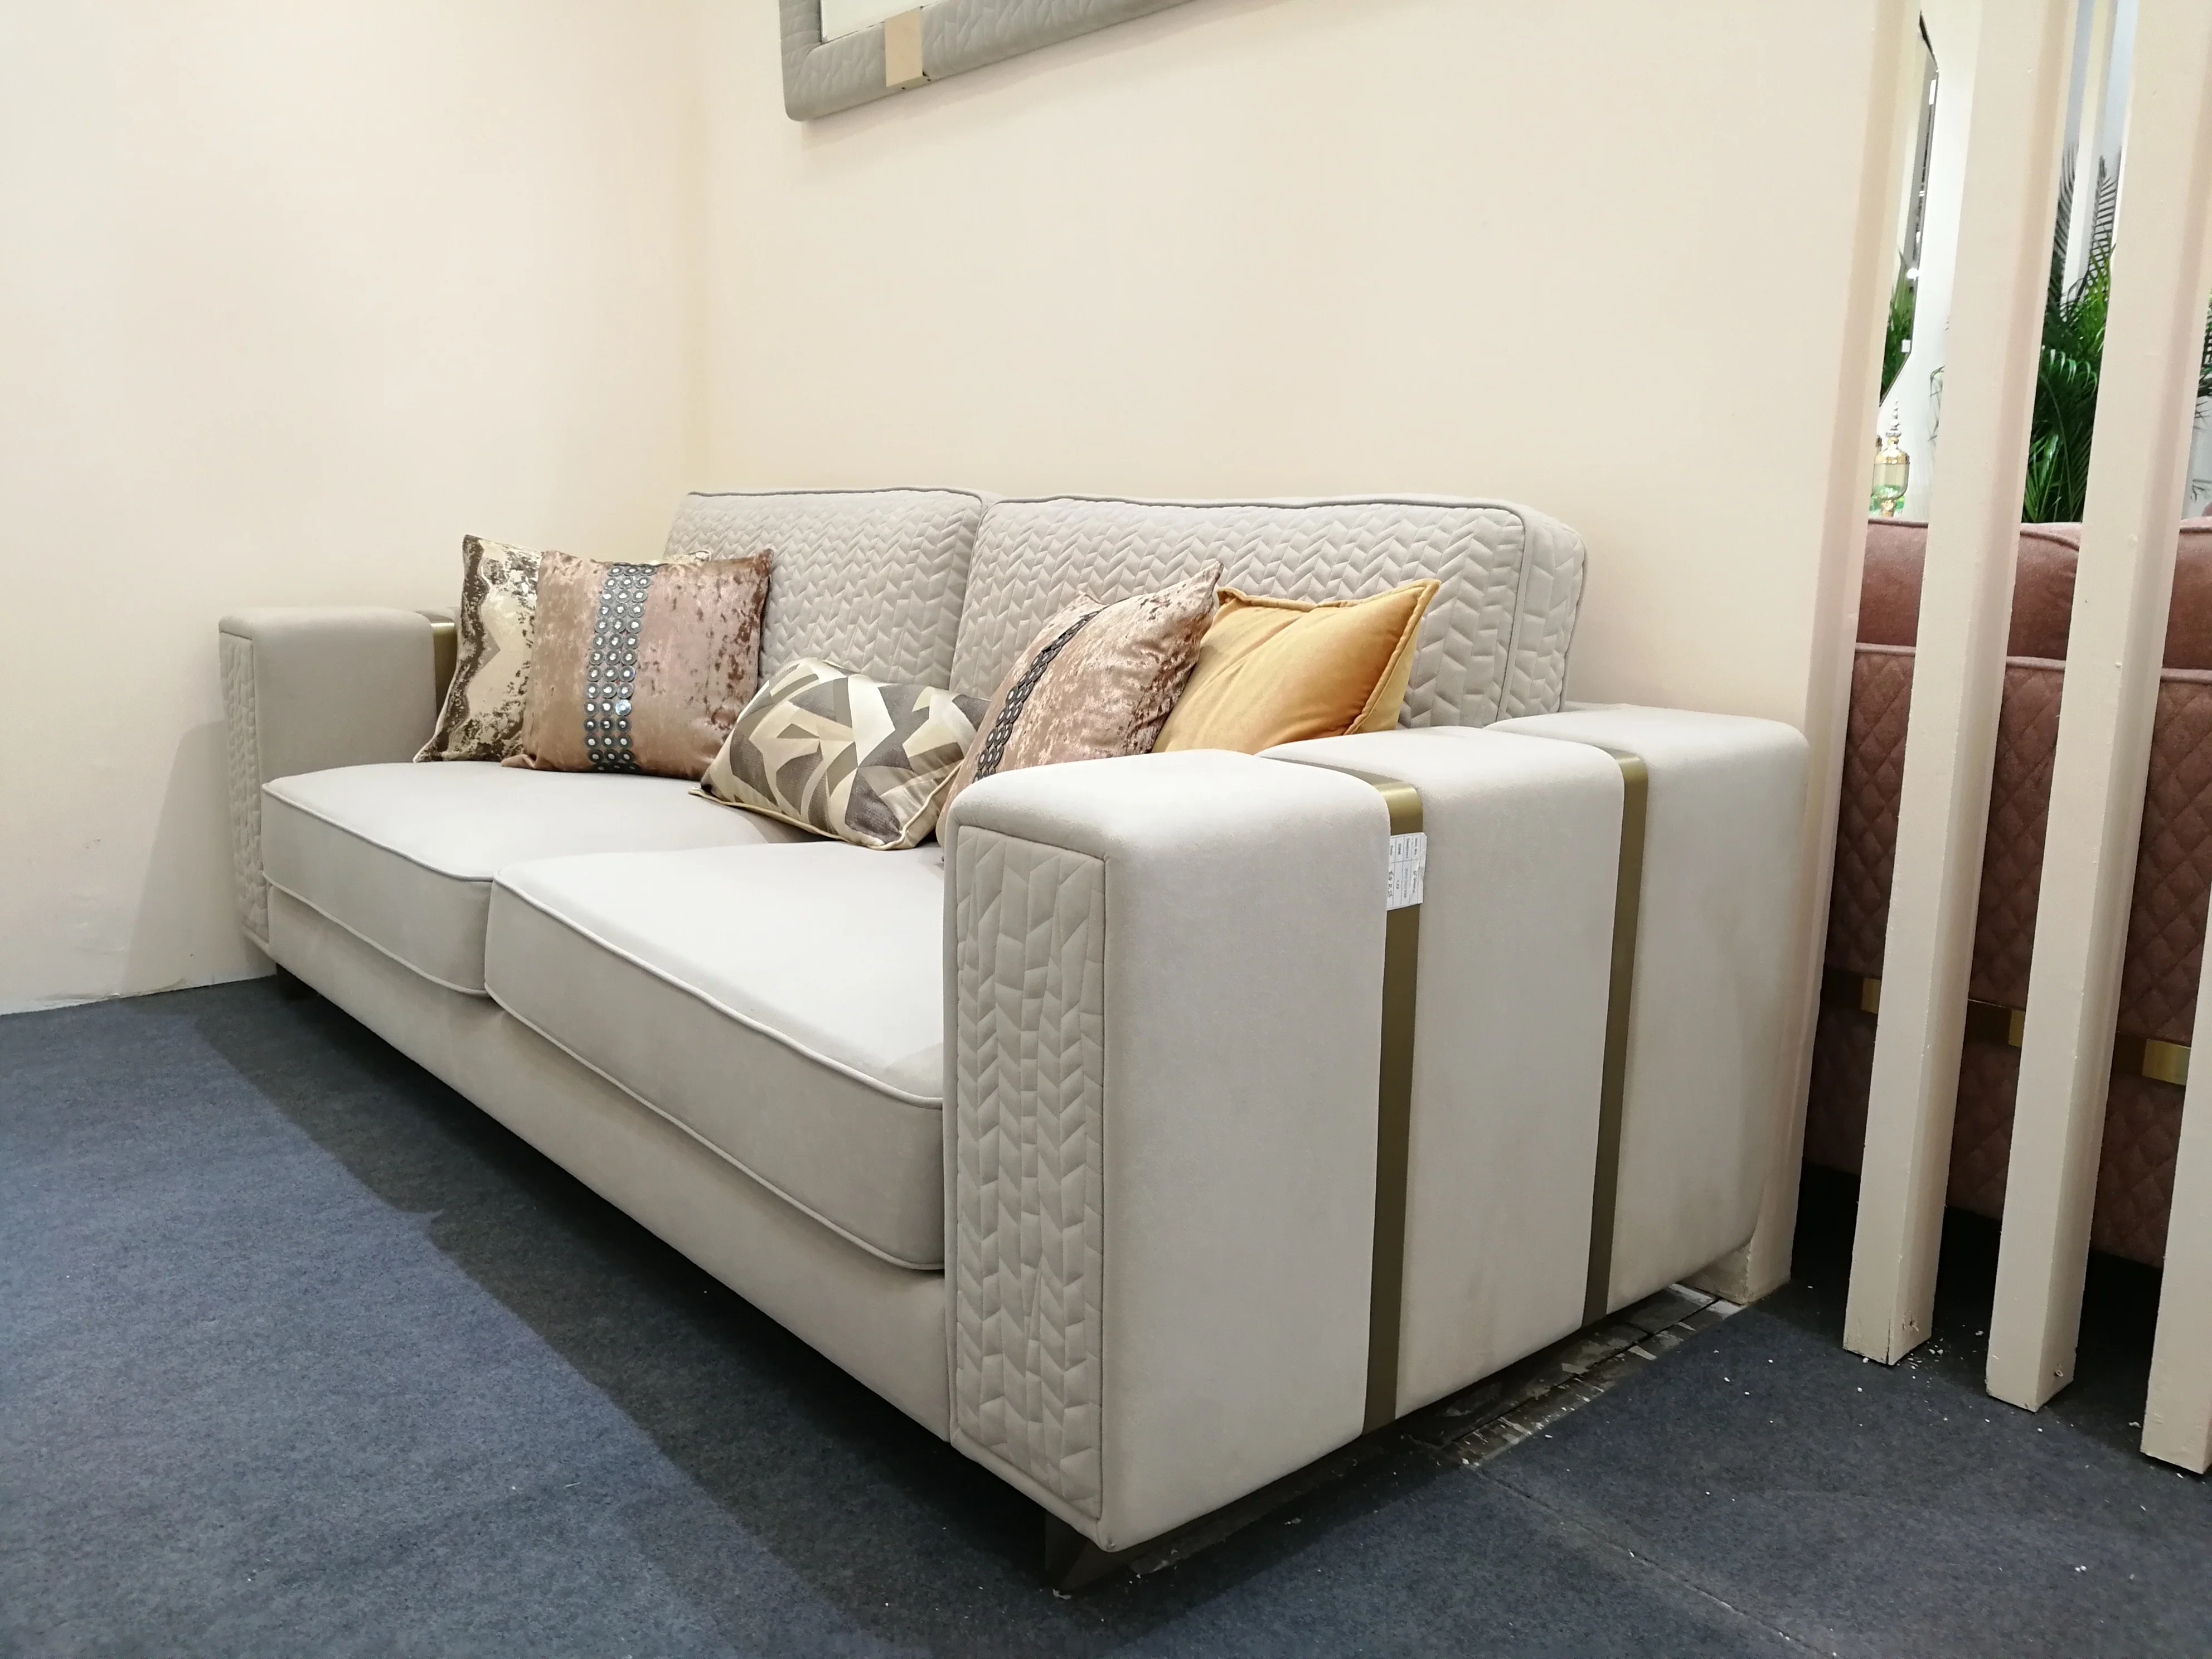 Modern Hot Selling All Handmade High quality Fabric back & 2 Seats with Stainless Steel decor Comfortable Grey Sofas